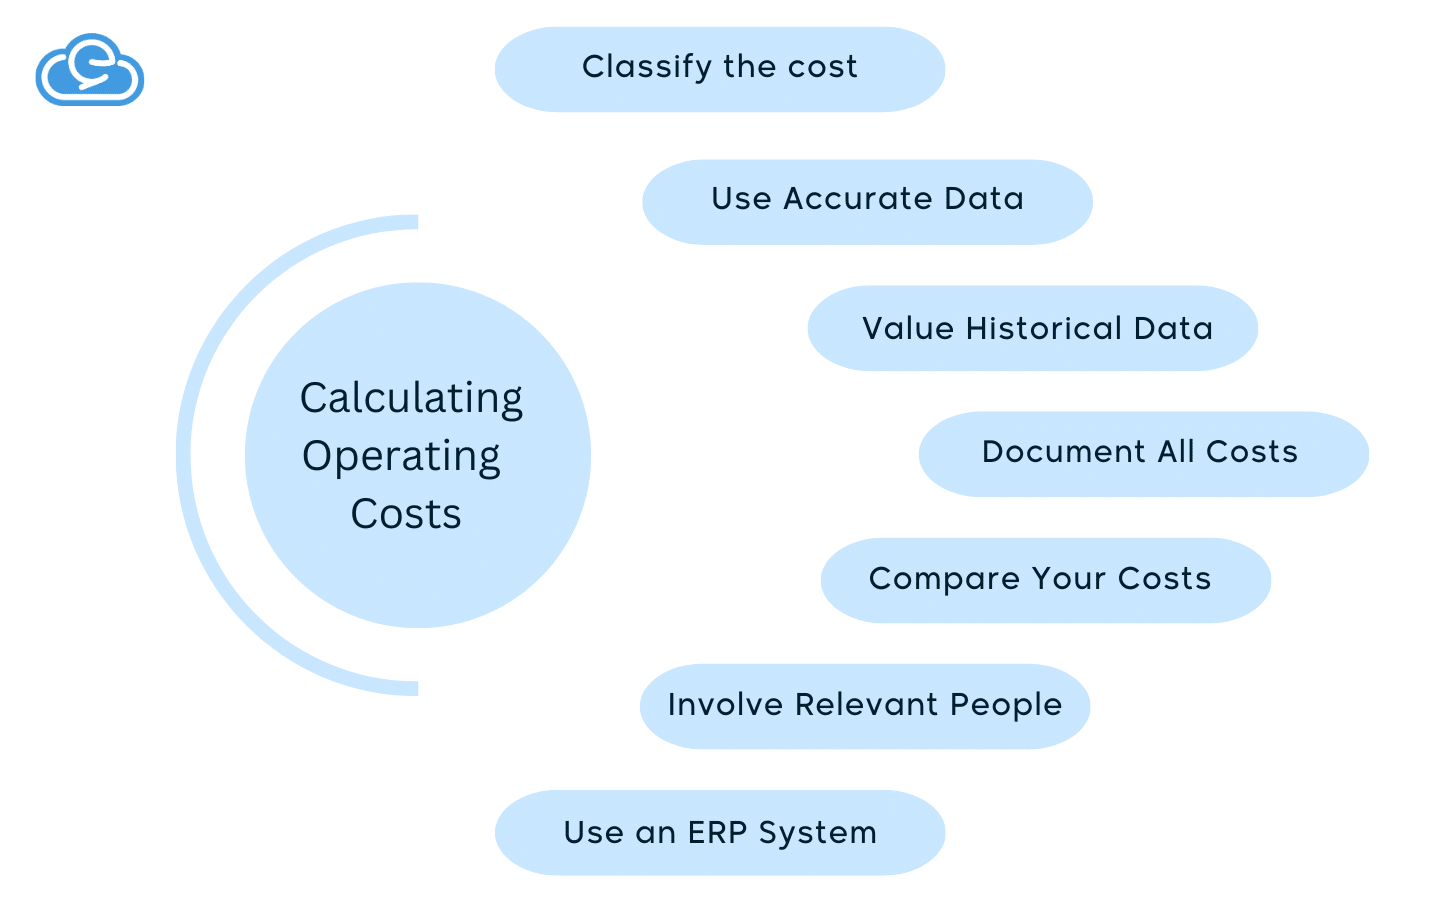 Tips for Accurately Calculating Operating Costs